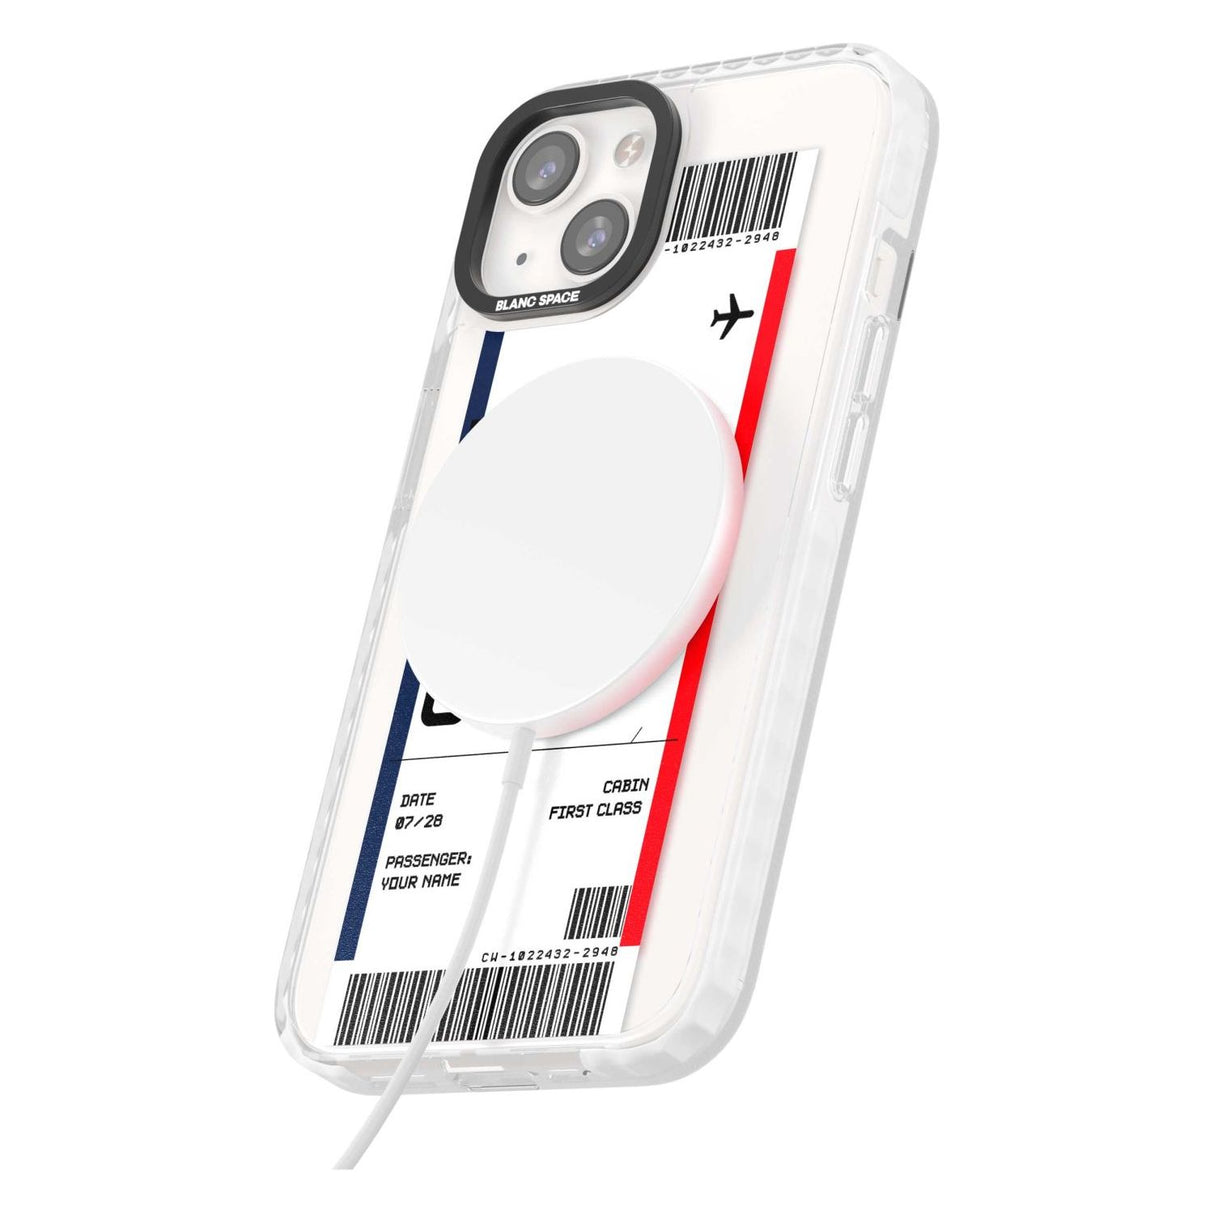 Personalised Create Your Own Boarding Pass Ticket Custom Phone Case iPhone 15 Pro Max / Black Impact Case,iPhone 15 Plus / Black Impact Case,iPhone 15 Pro / Black Impact Case,iPhone 15 / Black Impact Case,iPhone 15 Pro Max / Impact Case,iPhone 15 Plus / Impact Case,iPhone 15 Pro / Impact Case,iPhone 15 / Impact Case,iPhone 15 Pro Max / Magsafe Black Impact Case,iPhone 15 Plus / Magsafe Black Impact Case,iPhone 15 Pro / Magsafe Black Impact Case,iPhone 15 / Magsafe Black Impact Case,iPhone 14 Pro Max / Black